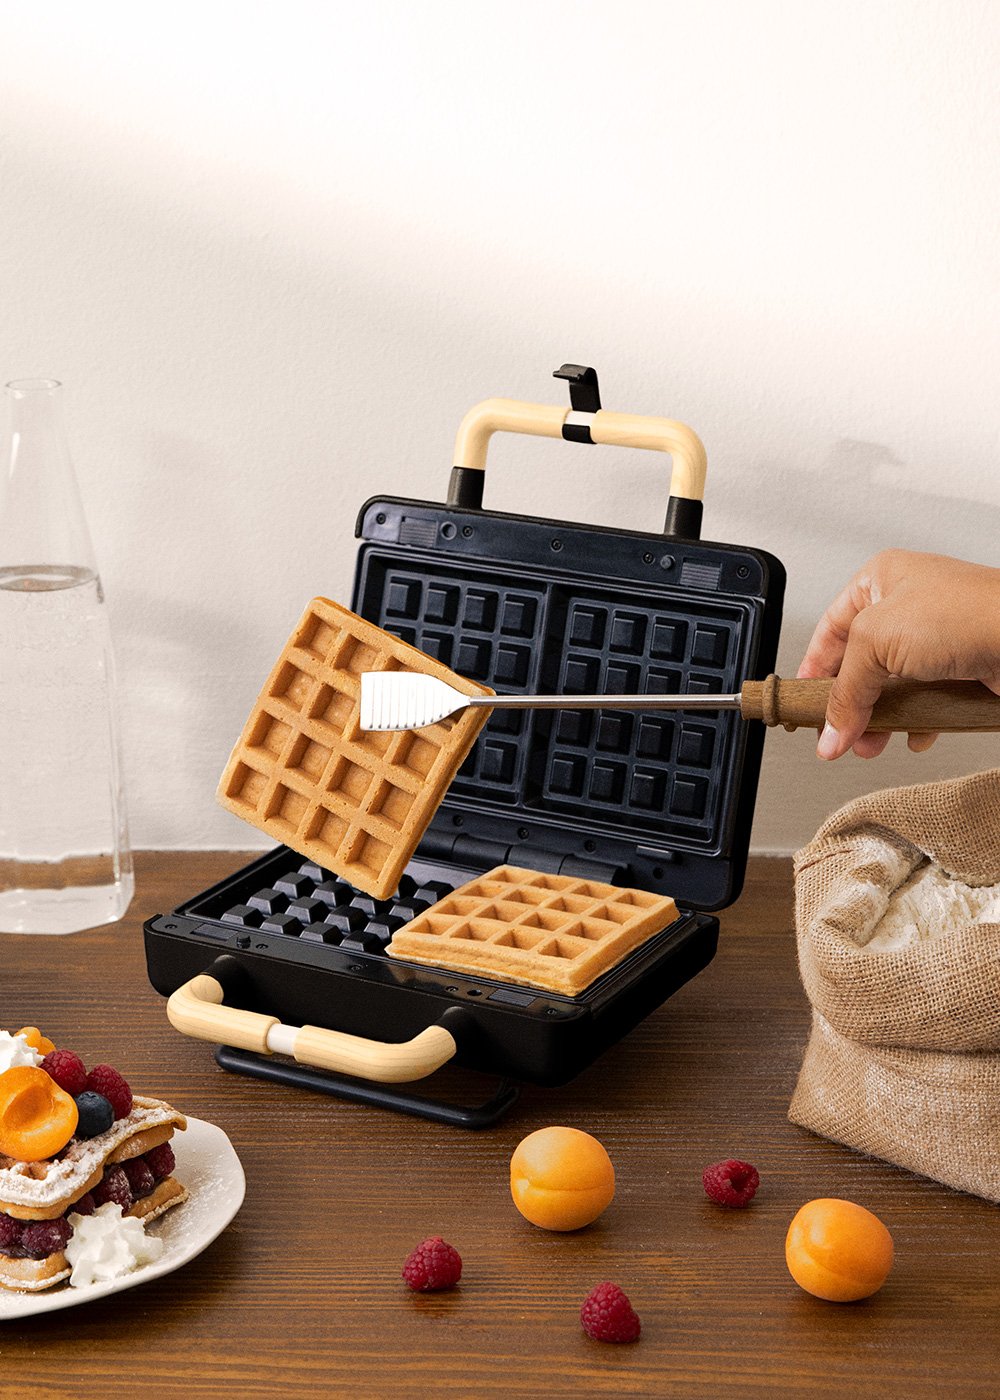 https://cdn.create-store.com/uk/2597095/stone-studio-sandwich-grill-and-waffle-maker-with-removable-plates.jpg